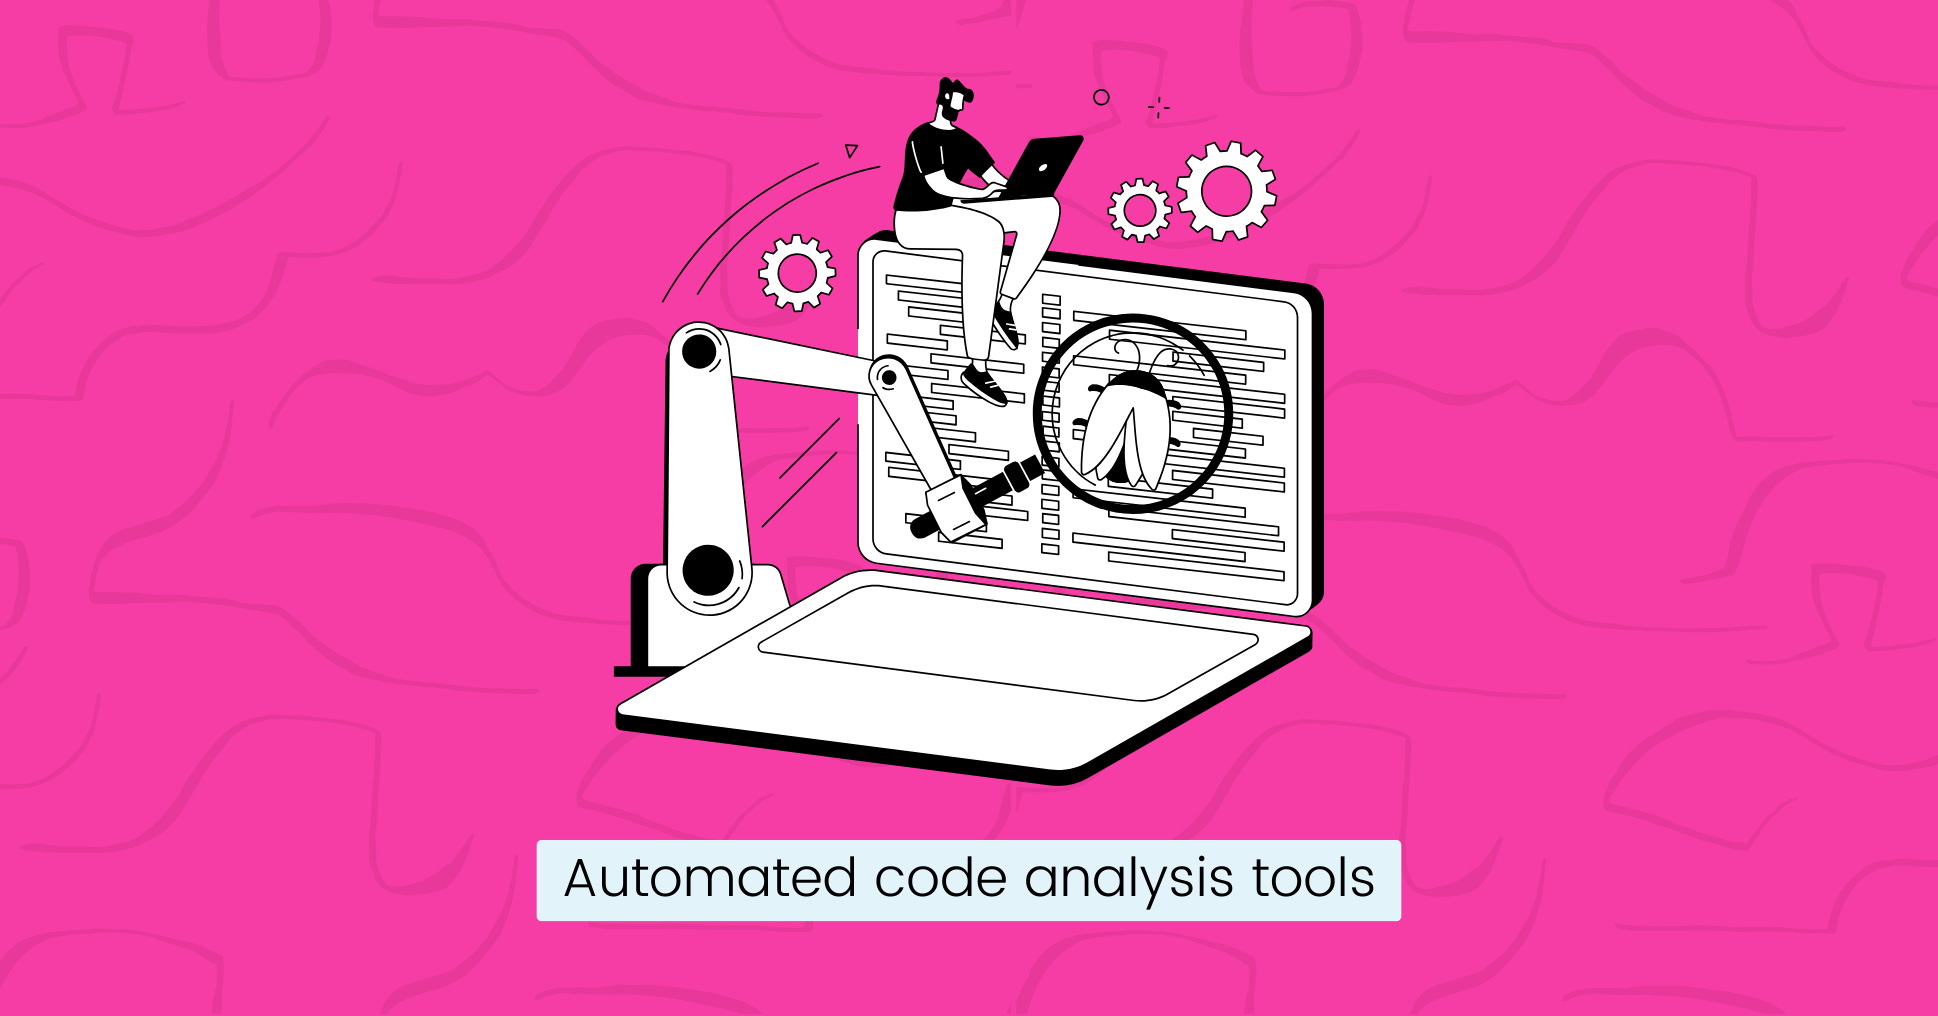 Automated code analysis tools